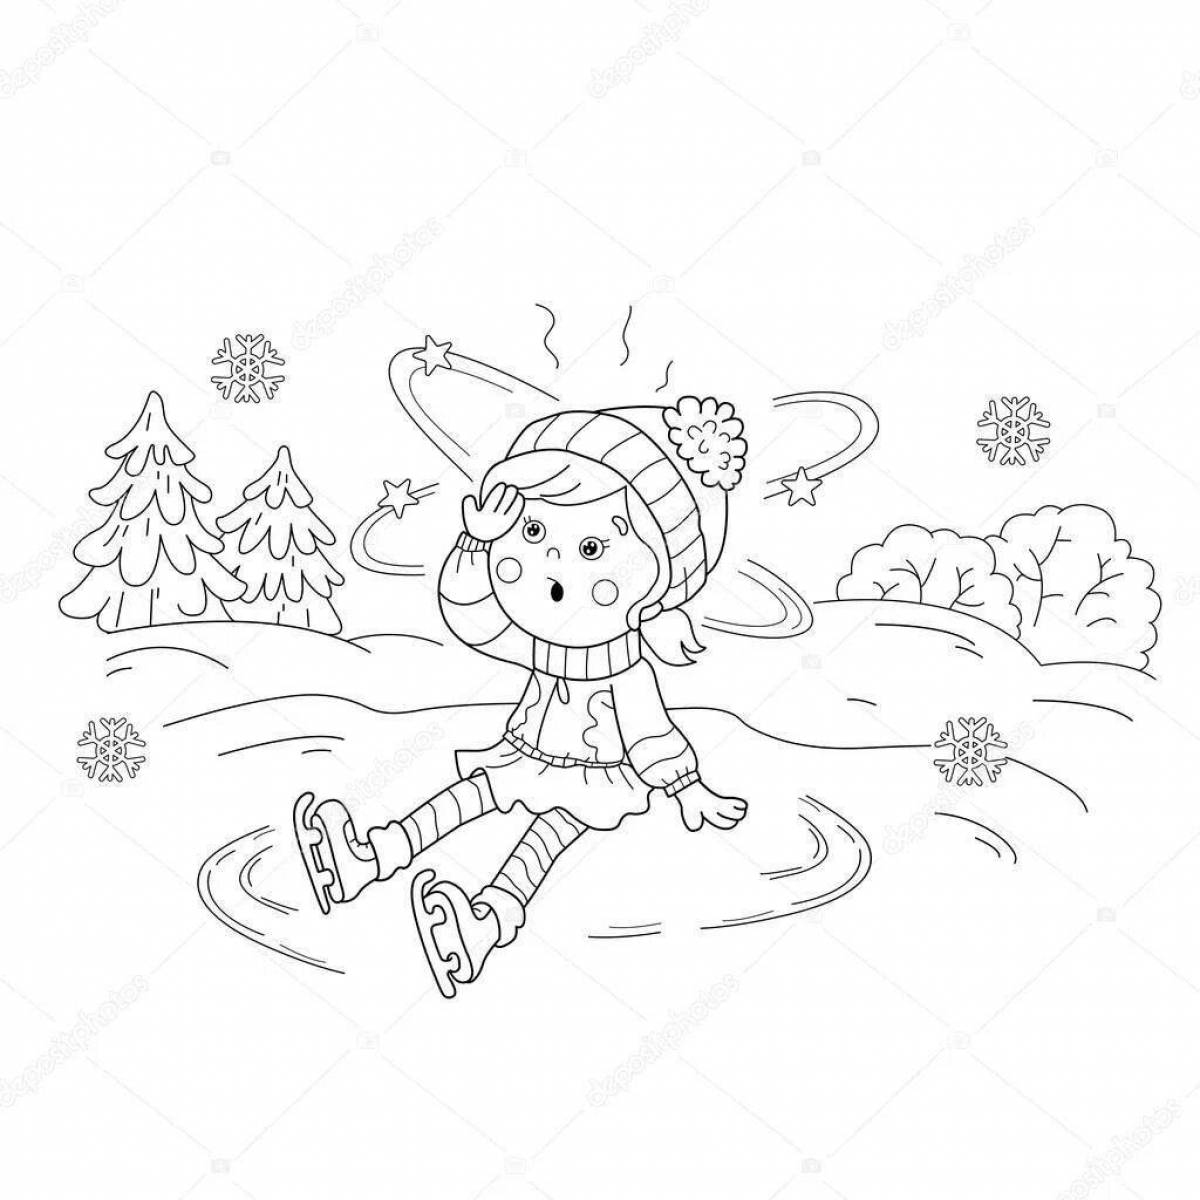 Vibrant Ice Safety Coloring Page for Kids